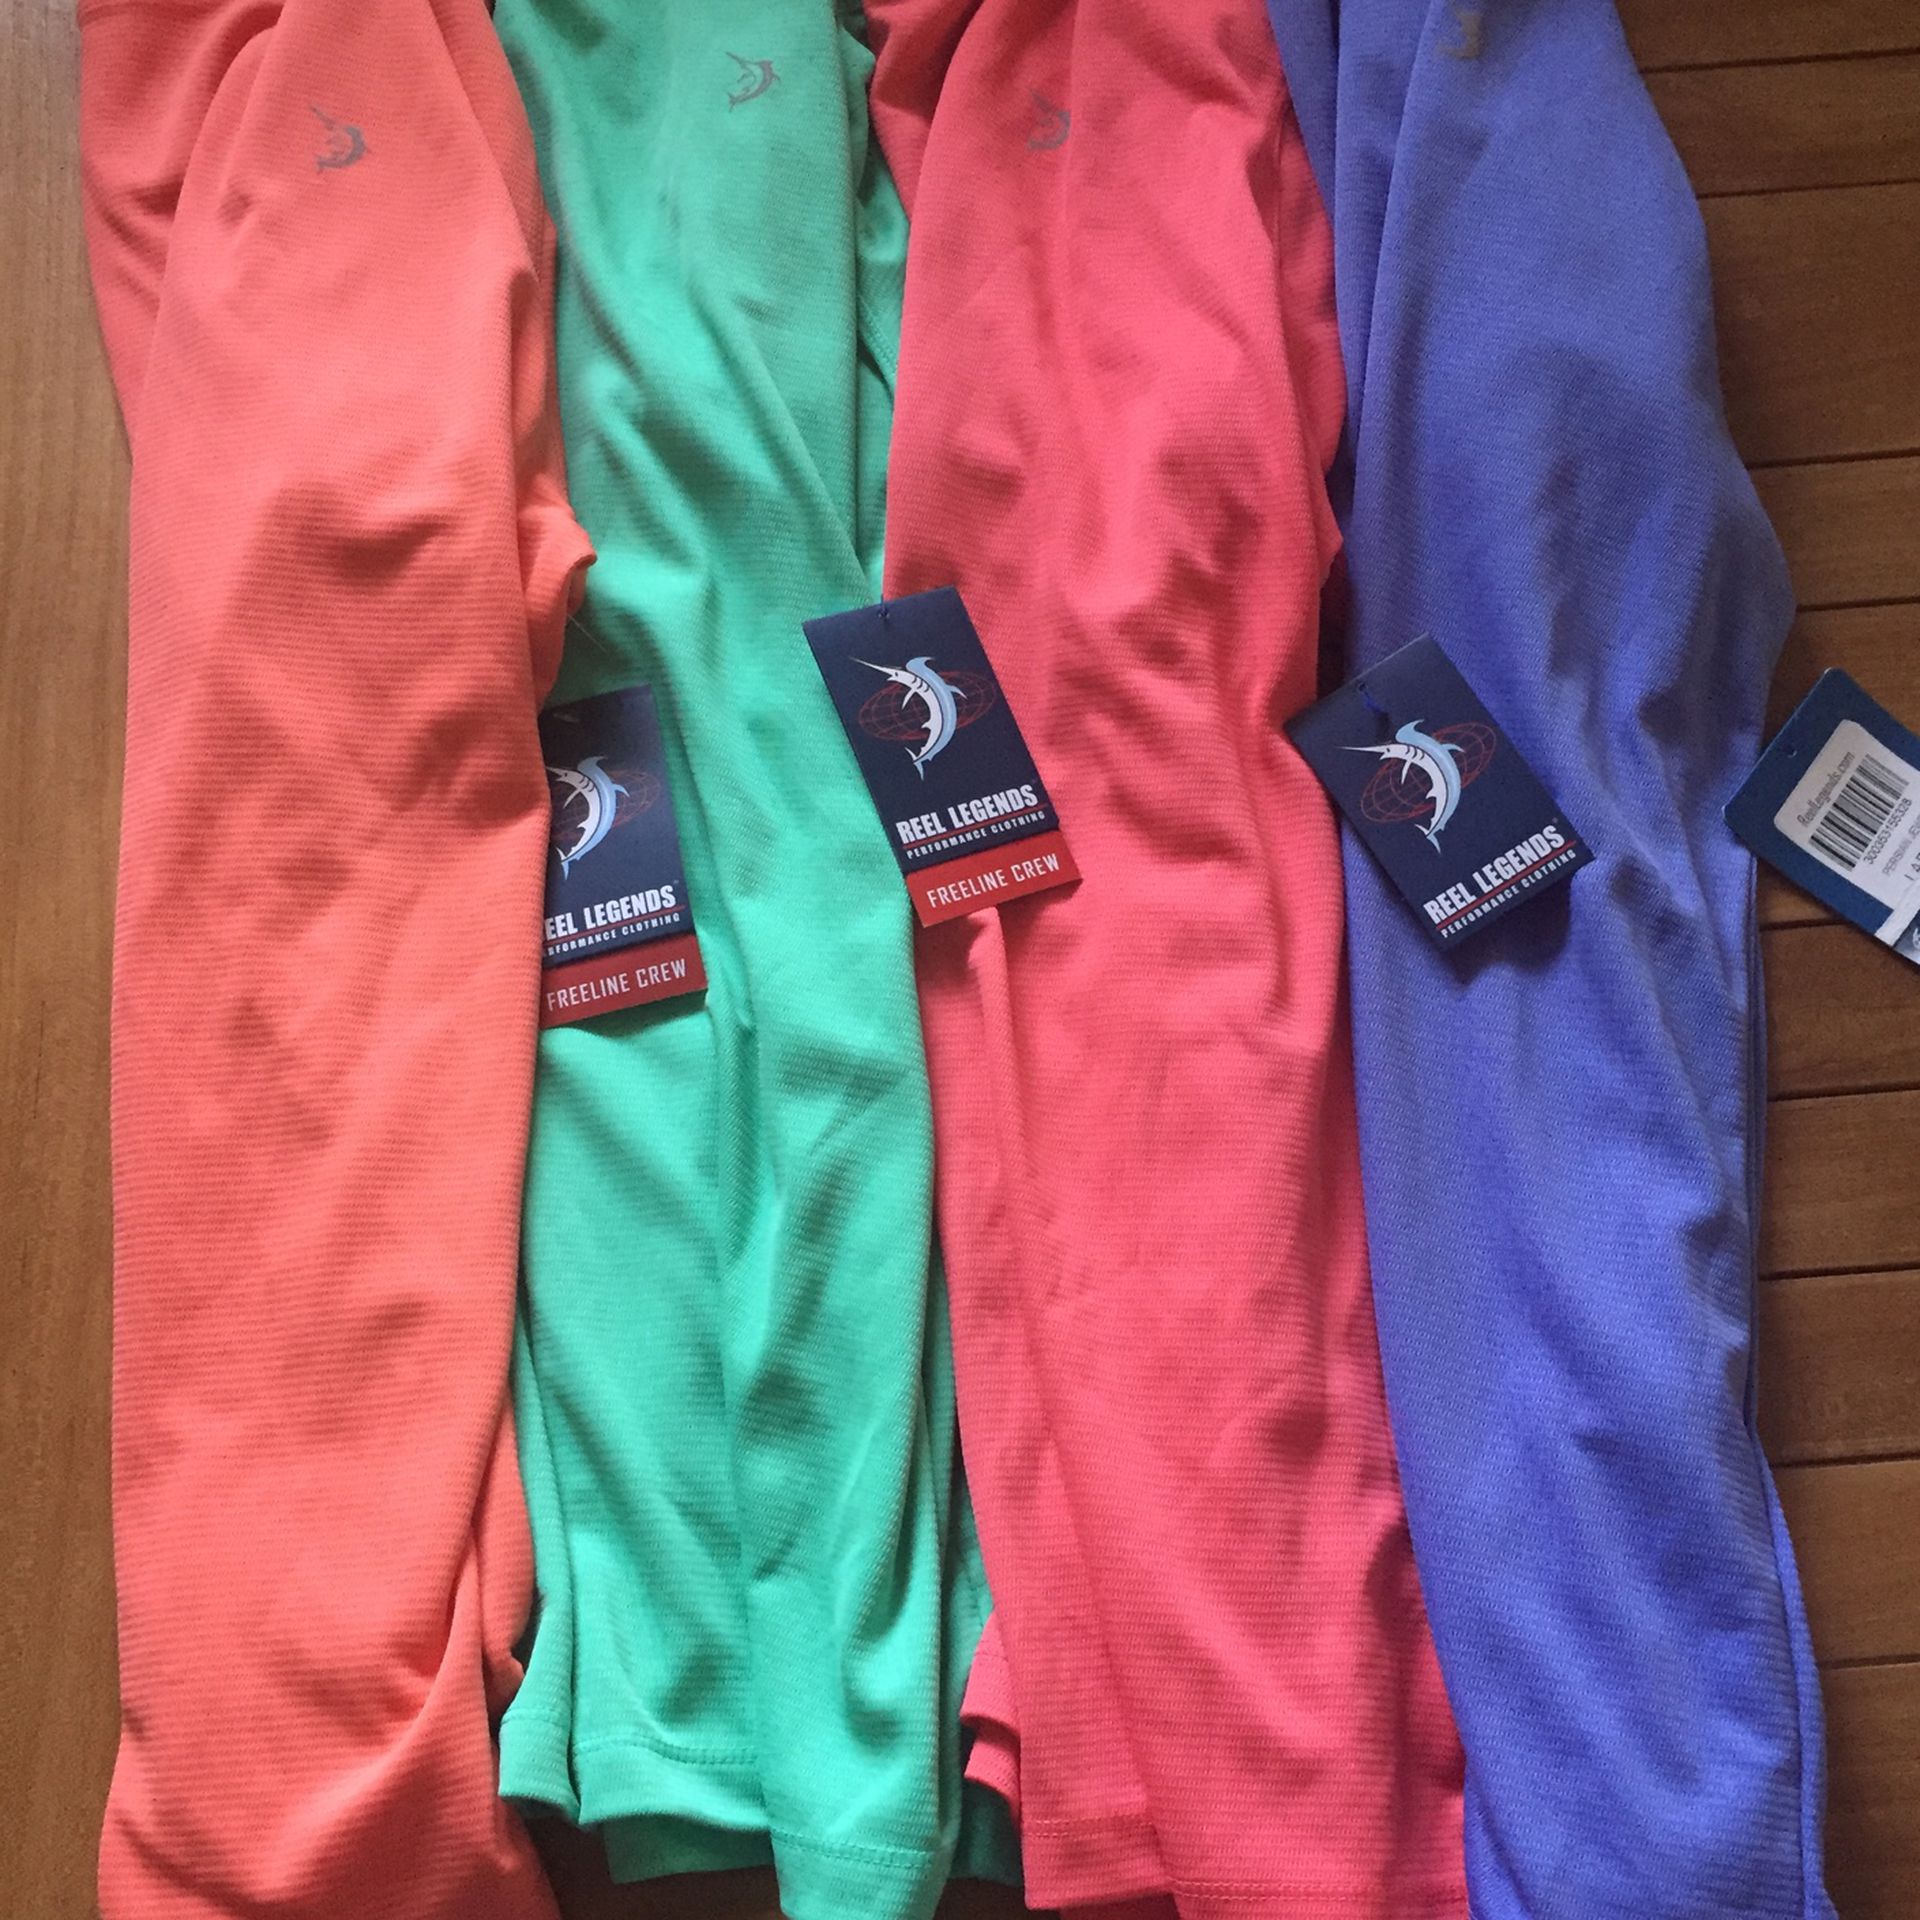 New Reel Legends Fishing Shirts Quick Dry UPF 30 for Sale in Lecanto, FL -  OfferUp